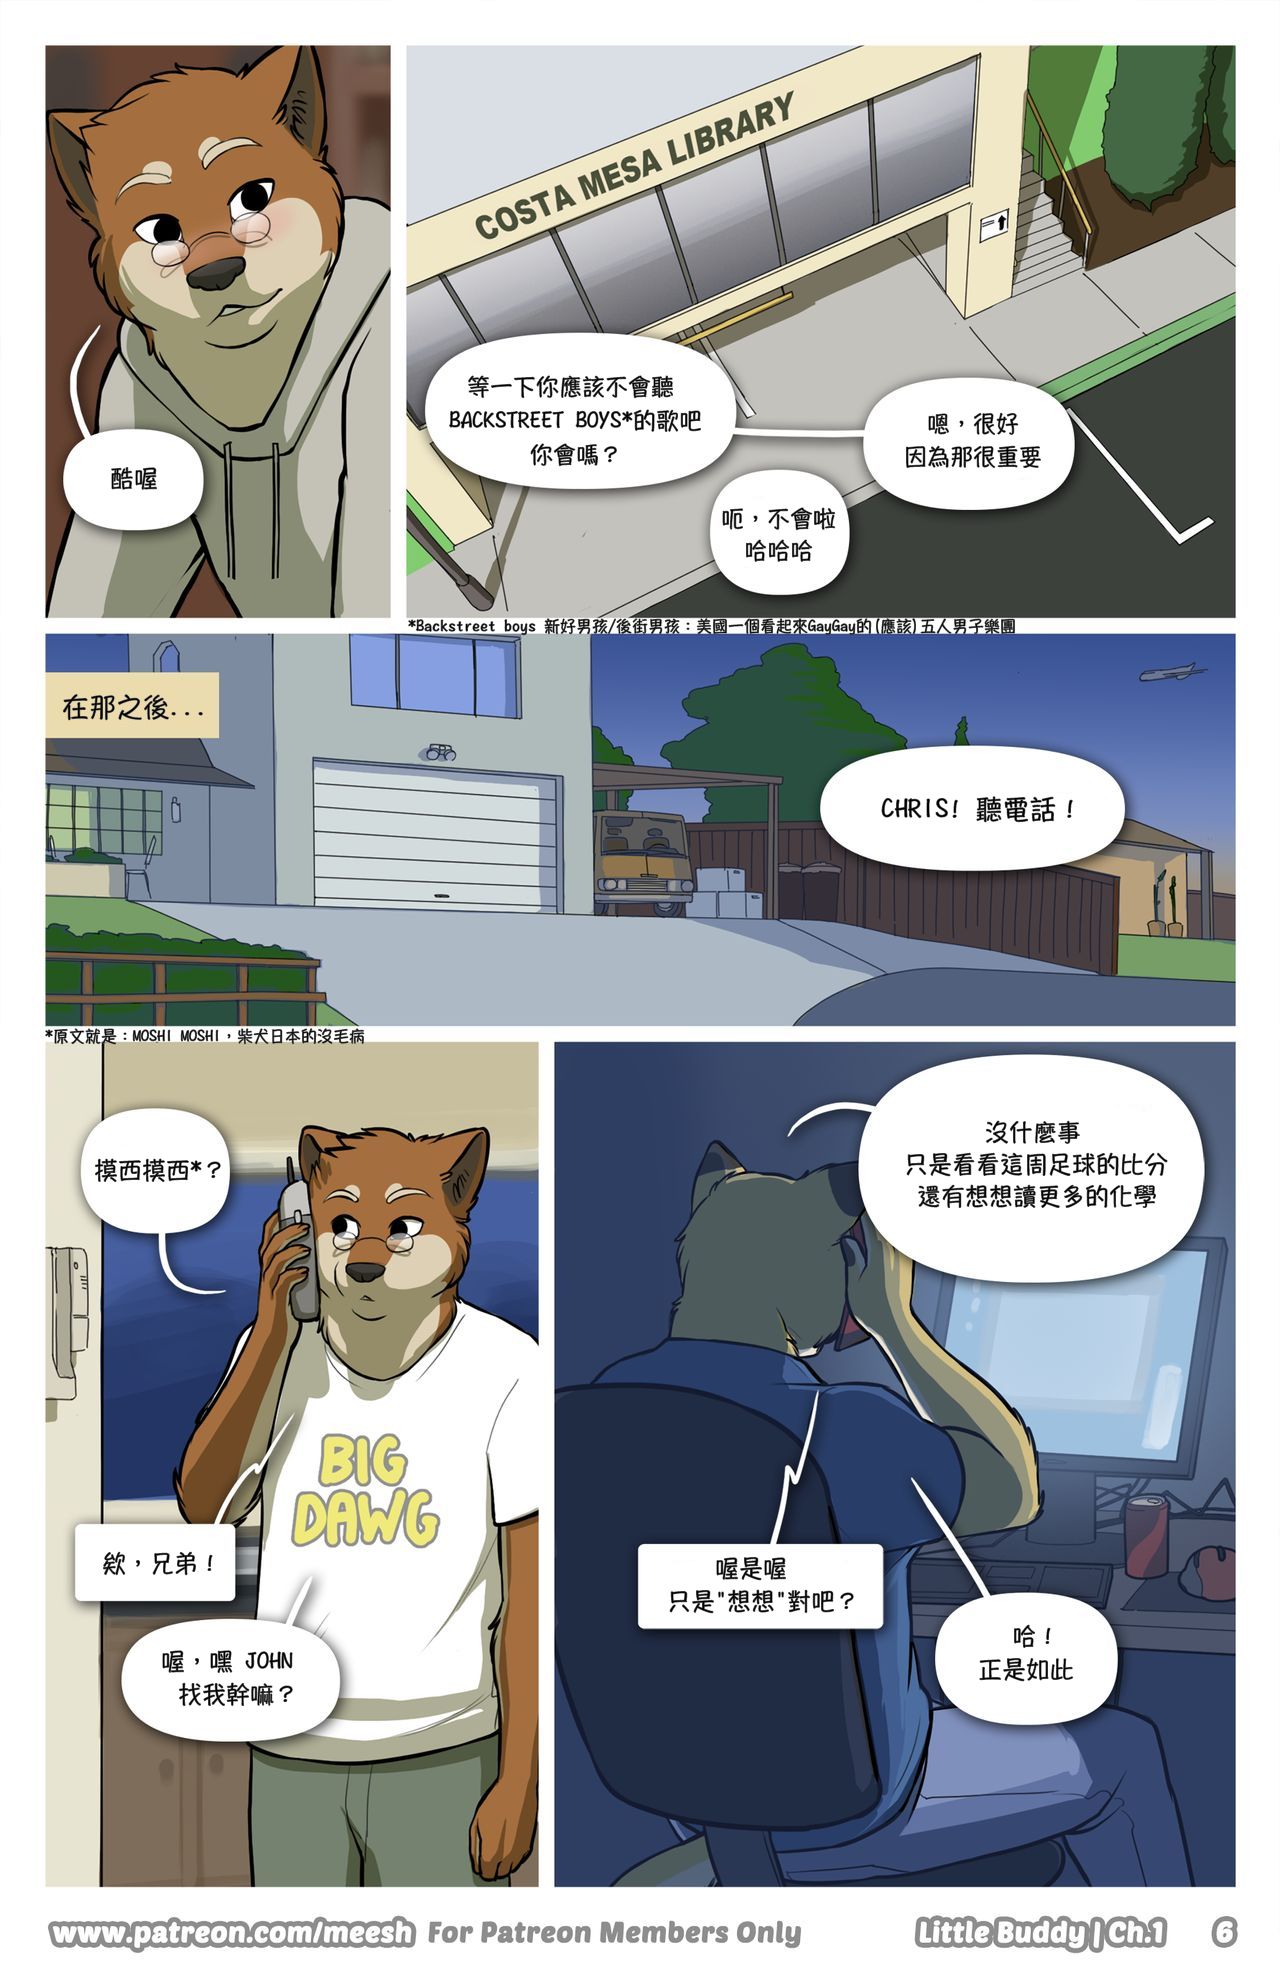 [Meesh] Little Buddy (High-Resolution) [Chapter 1: Complete] [Chinese] [簡yee個人] 